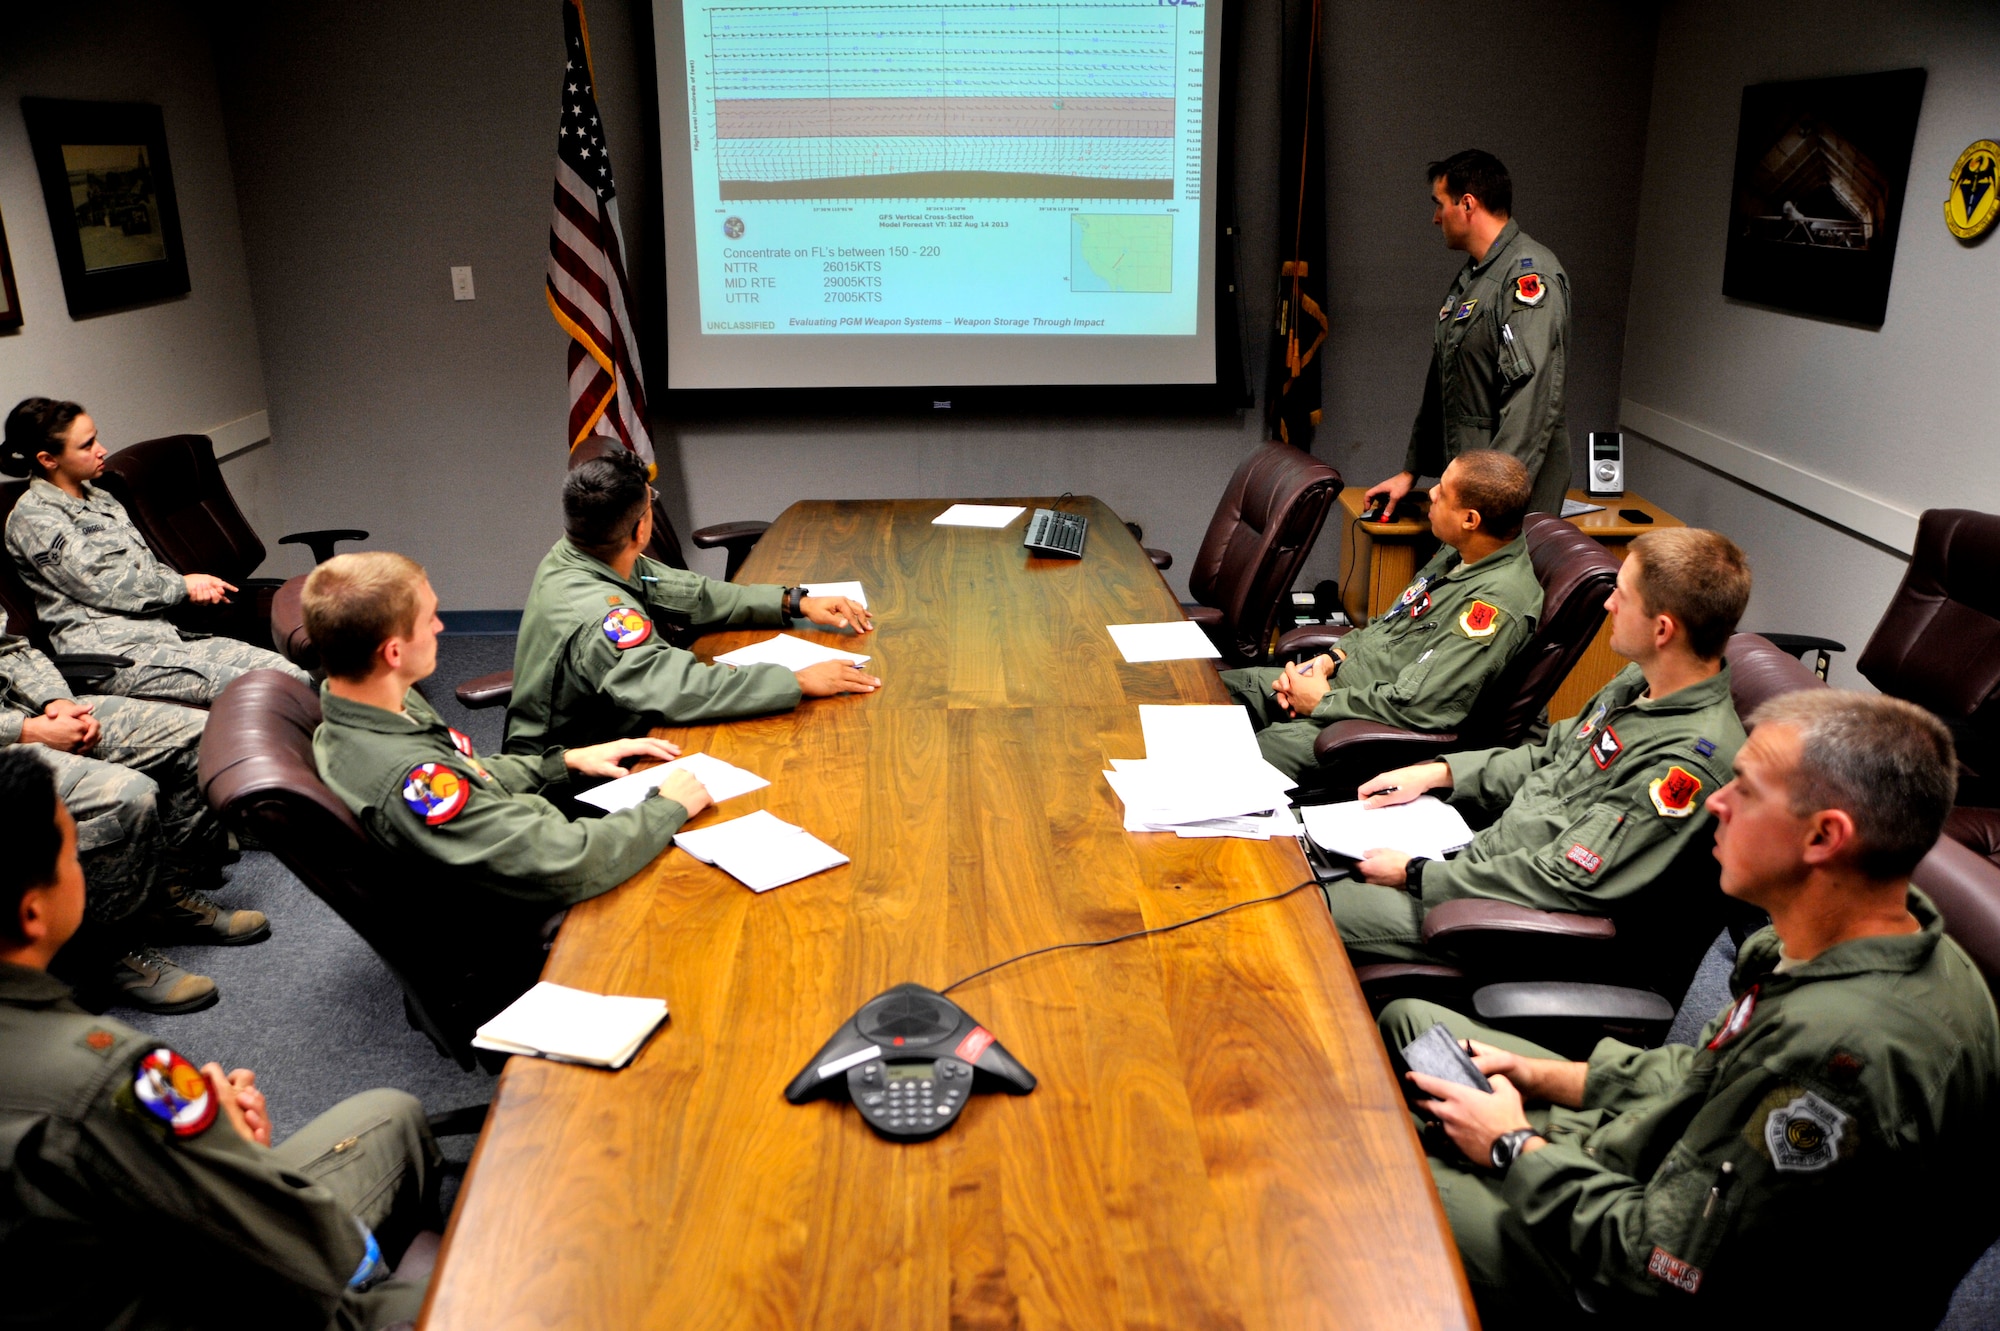 Members of the 11th Reconnaissance Squadron receive a pre-flight briefing May 12, 2014, at Creech Air Force Base, Nev. The 1th RS flew the MQ-9 Reaper in a week-long mission, known as Combat Hammer, where they released the GBU-12 Paveway II and AGM-114 Hellfire munitions. (U.S. Air Force photo/Airman 1st Class C.C.)